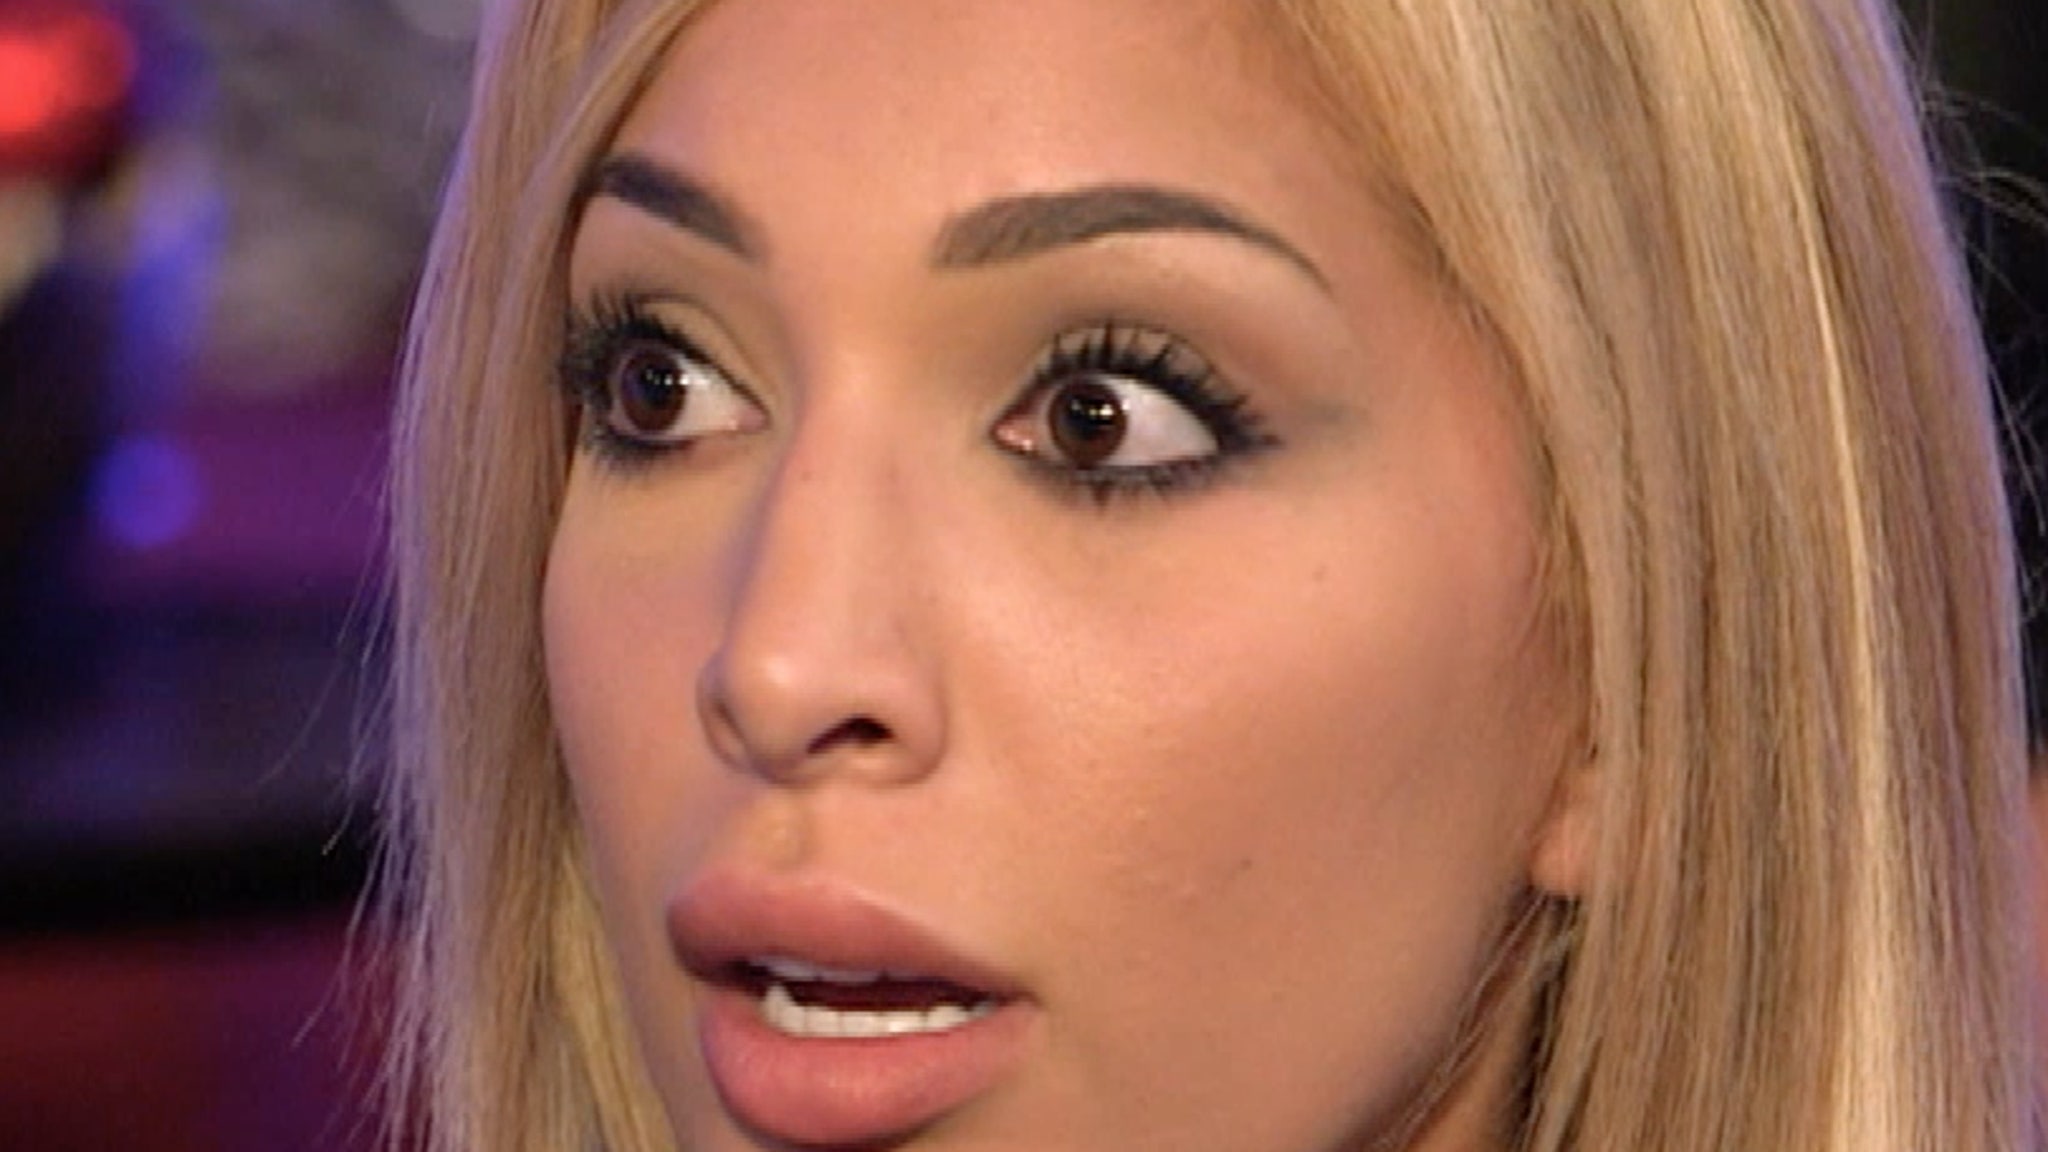 The Situations Brother Slut Shames Farrah Abraham In First Trailer For Marriage Boot Camp